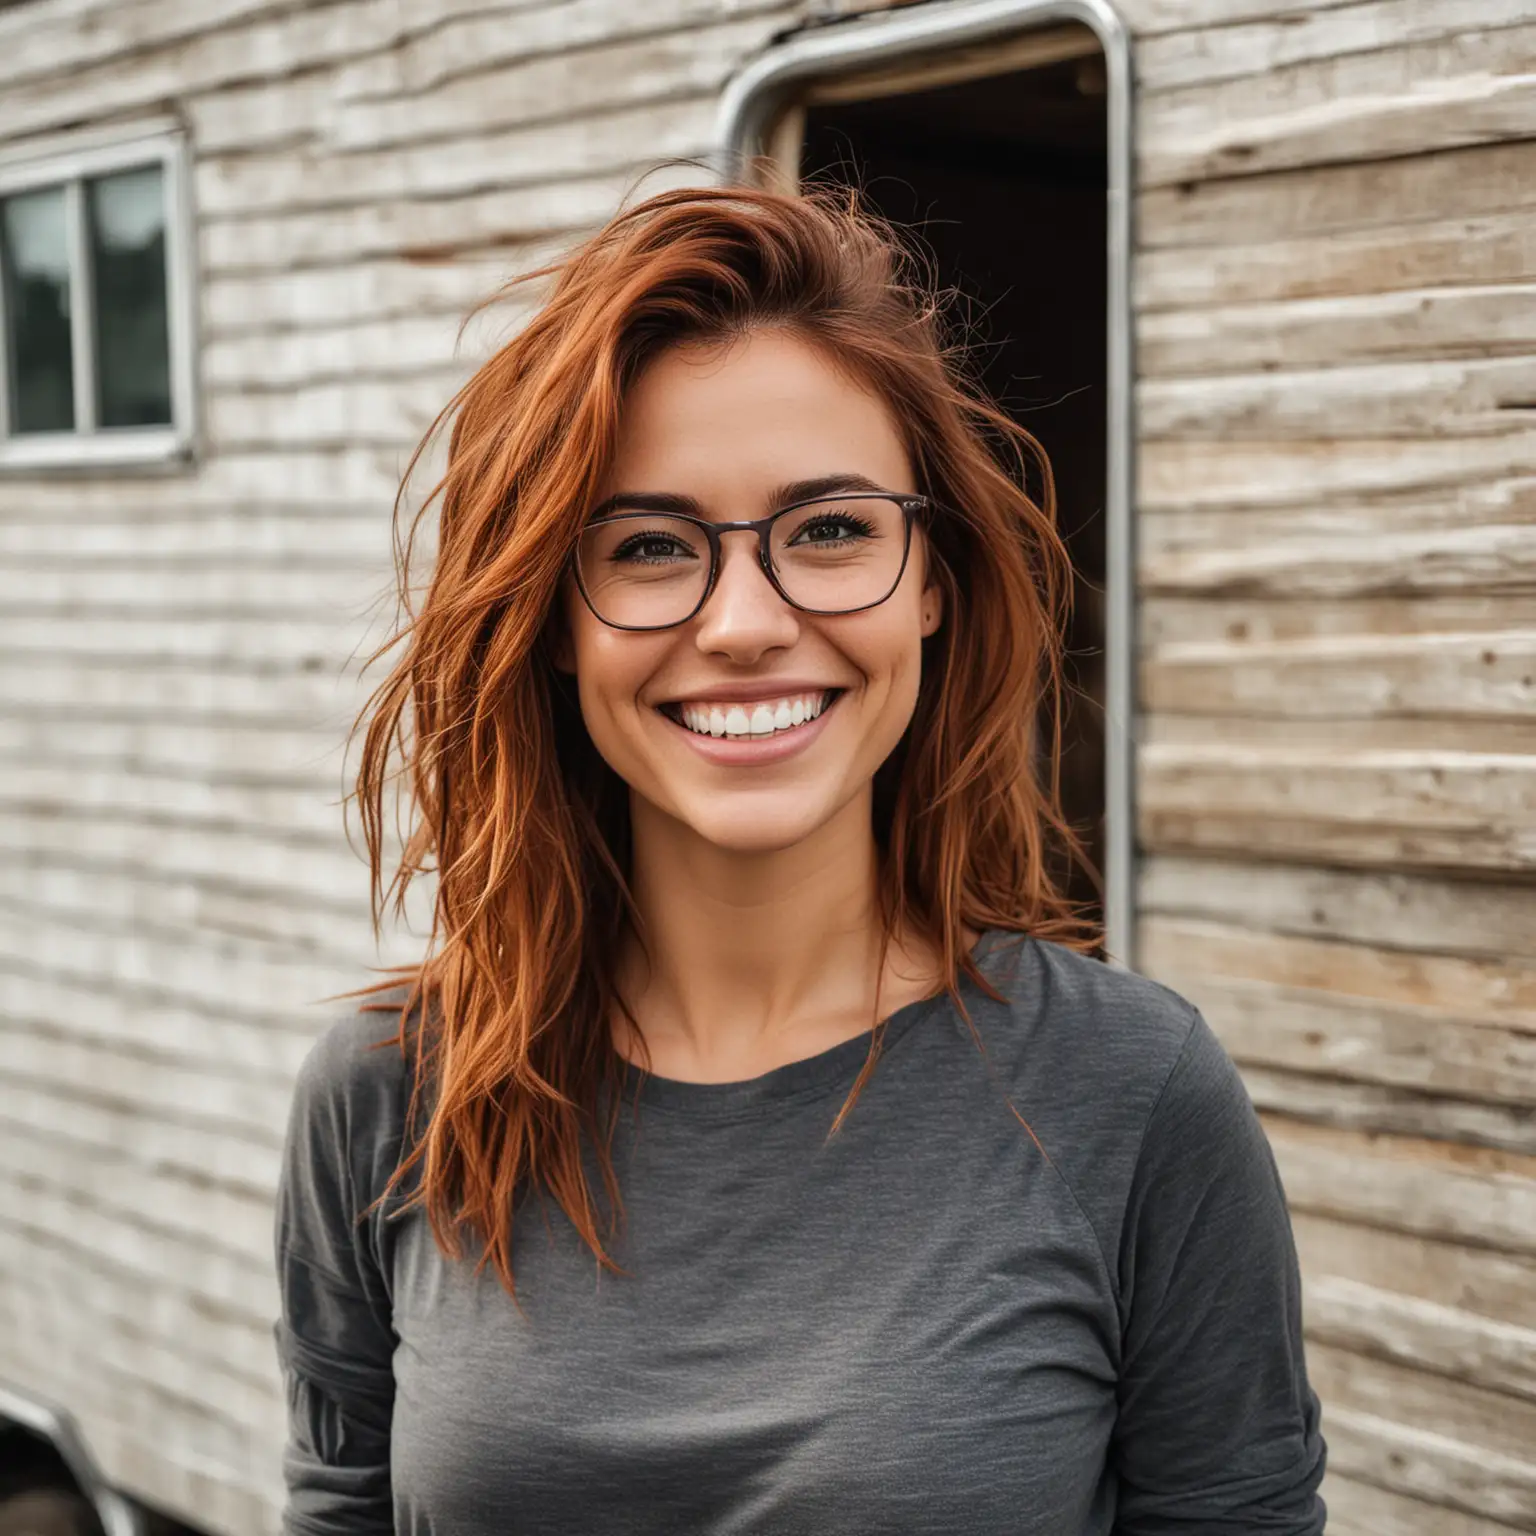  28-year-old fit woman, who is attractive with white teeth, glasses, a tilted head, auburn messy hair, and a stunning smile, stands in front of a trailer home.